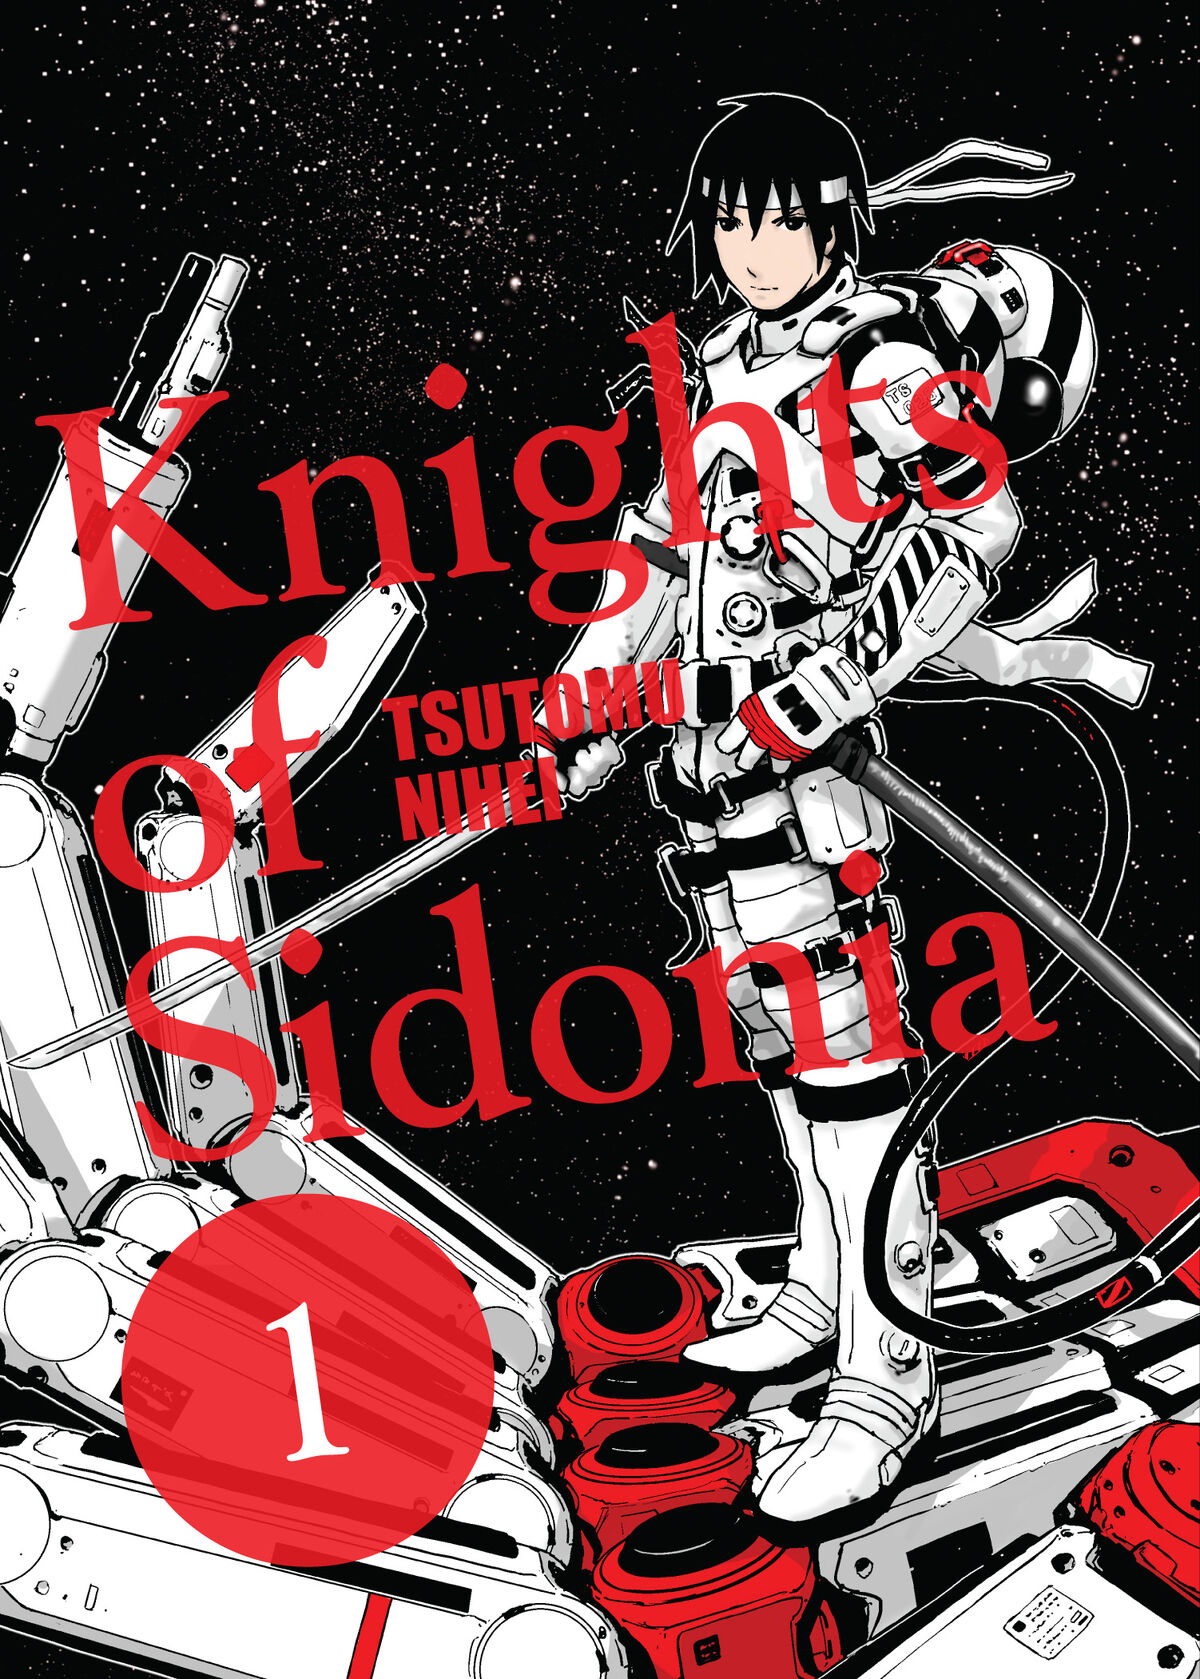 Stream Anime Club Episode 1: Knights of Sidonia by dynamitefist